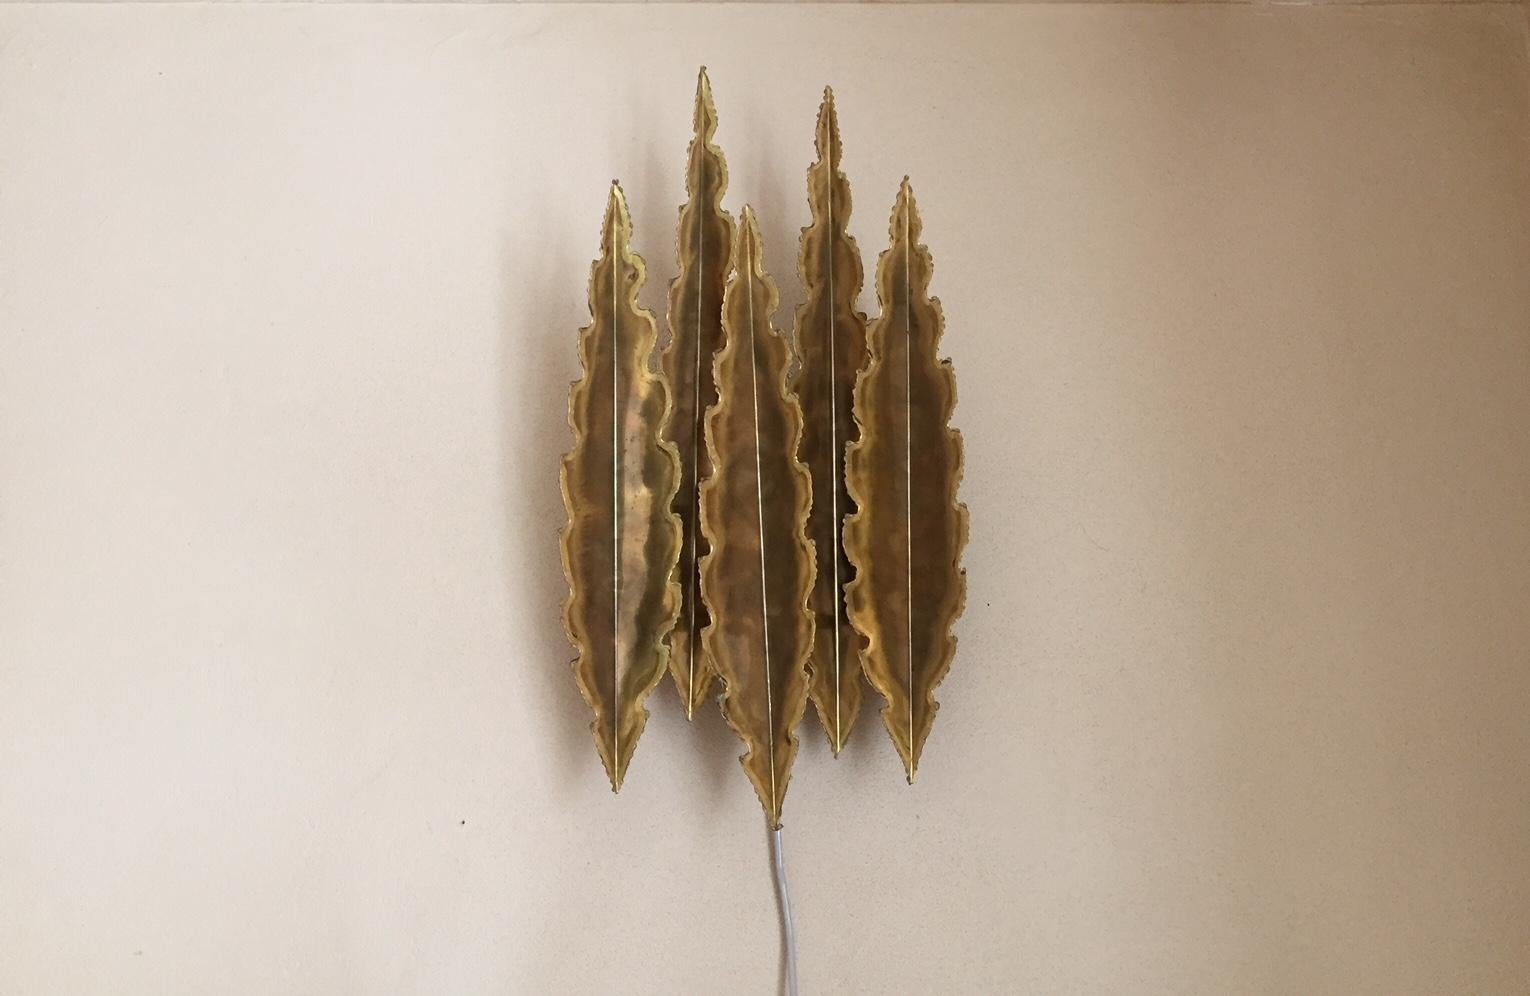 This large (57/30 cm) Danish Brutalist wall light is composed of partially acid-treated and torch-cut brass. This model 5195 was designed by Svend Aage Holm Sørensen in Denmark during the early 1960s. The shade resembles flames - five to be exact.